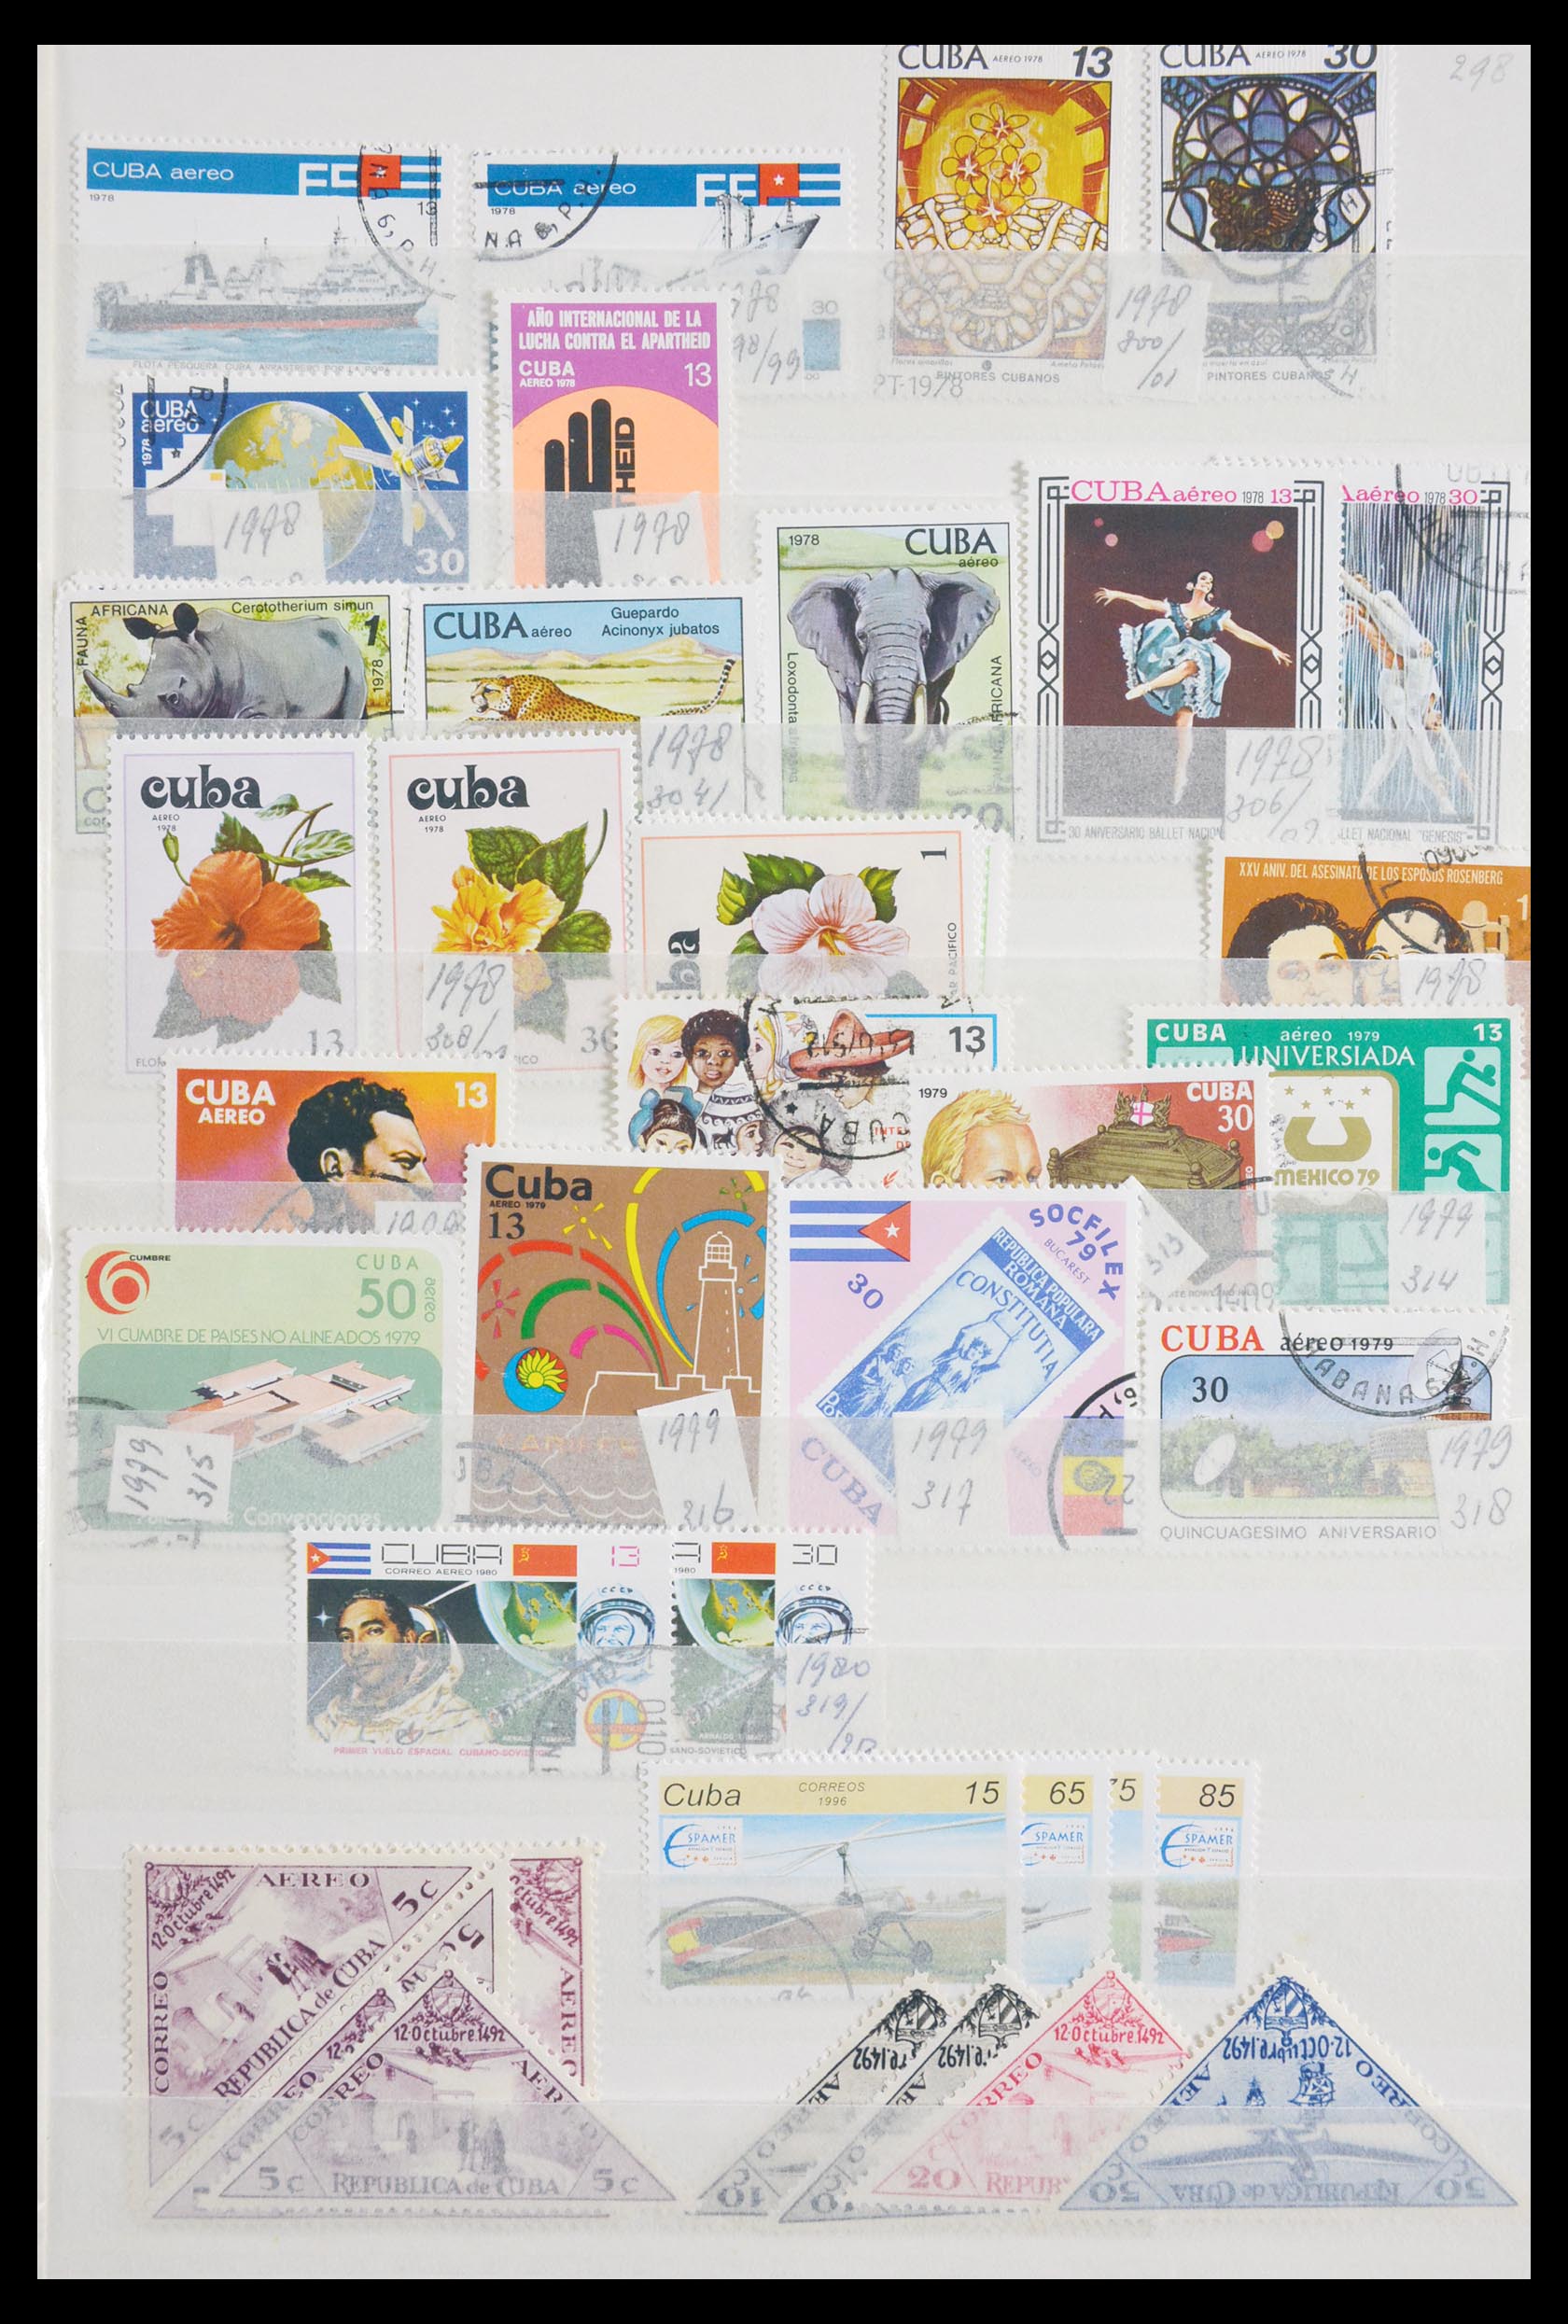 29917 053 - 29917 Latin America airmail stamps.